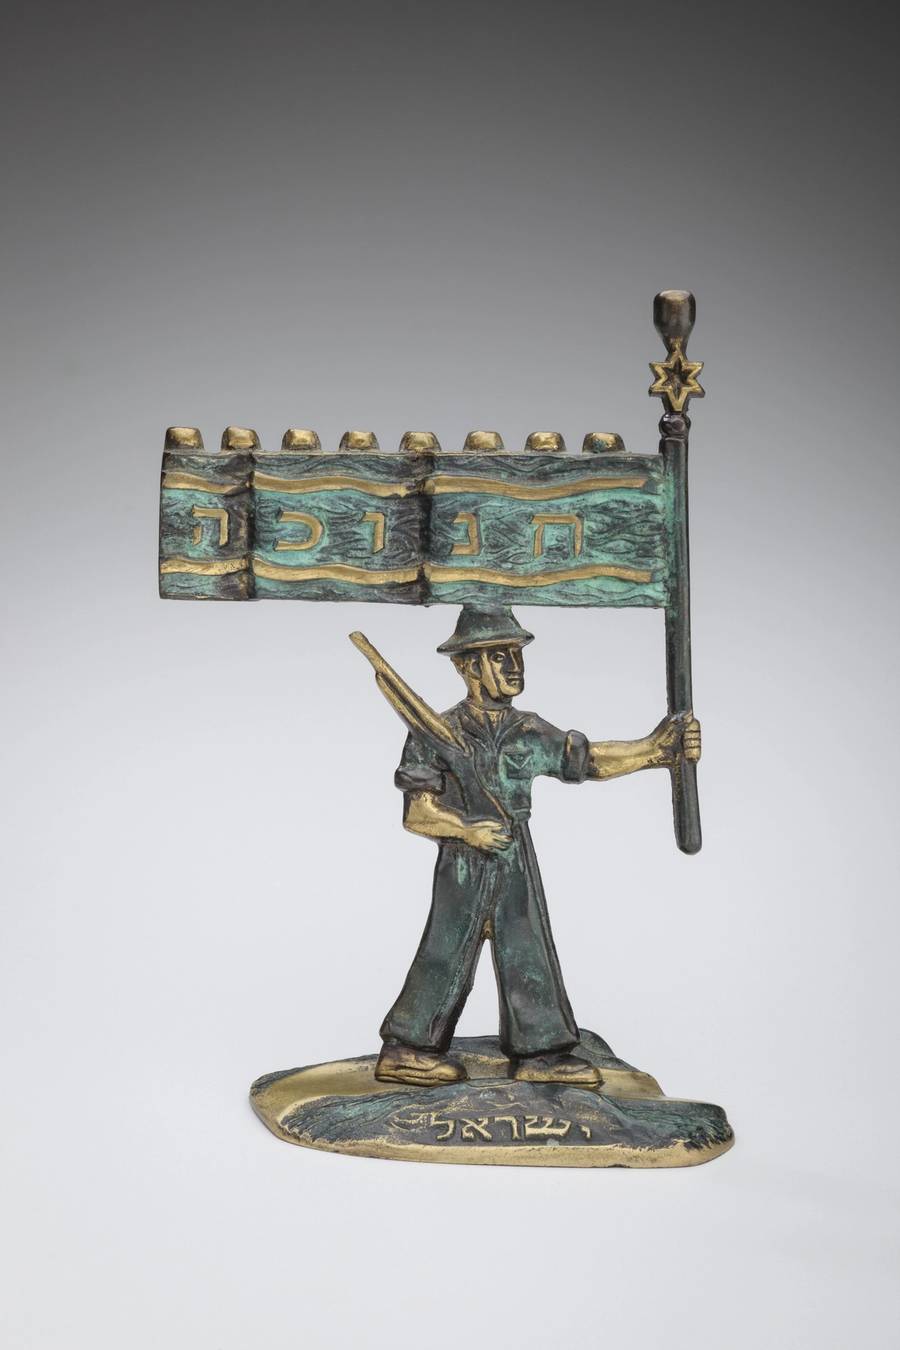 Hanukkah Lamp, 1950s. Copper alloy: cast and patinated